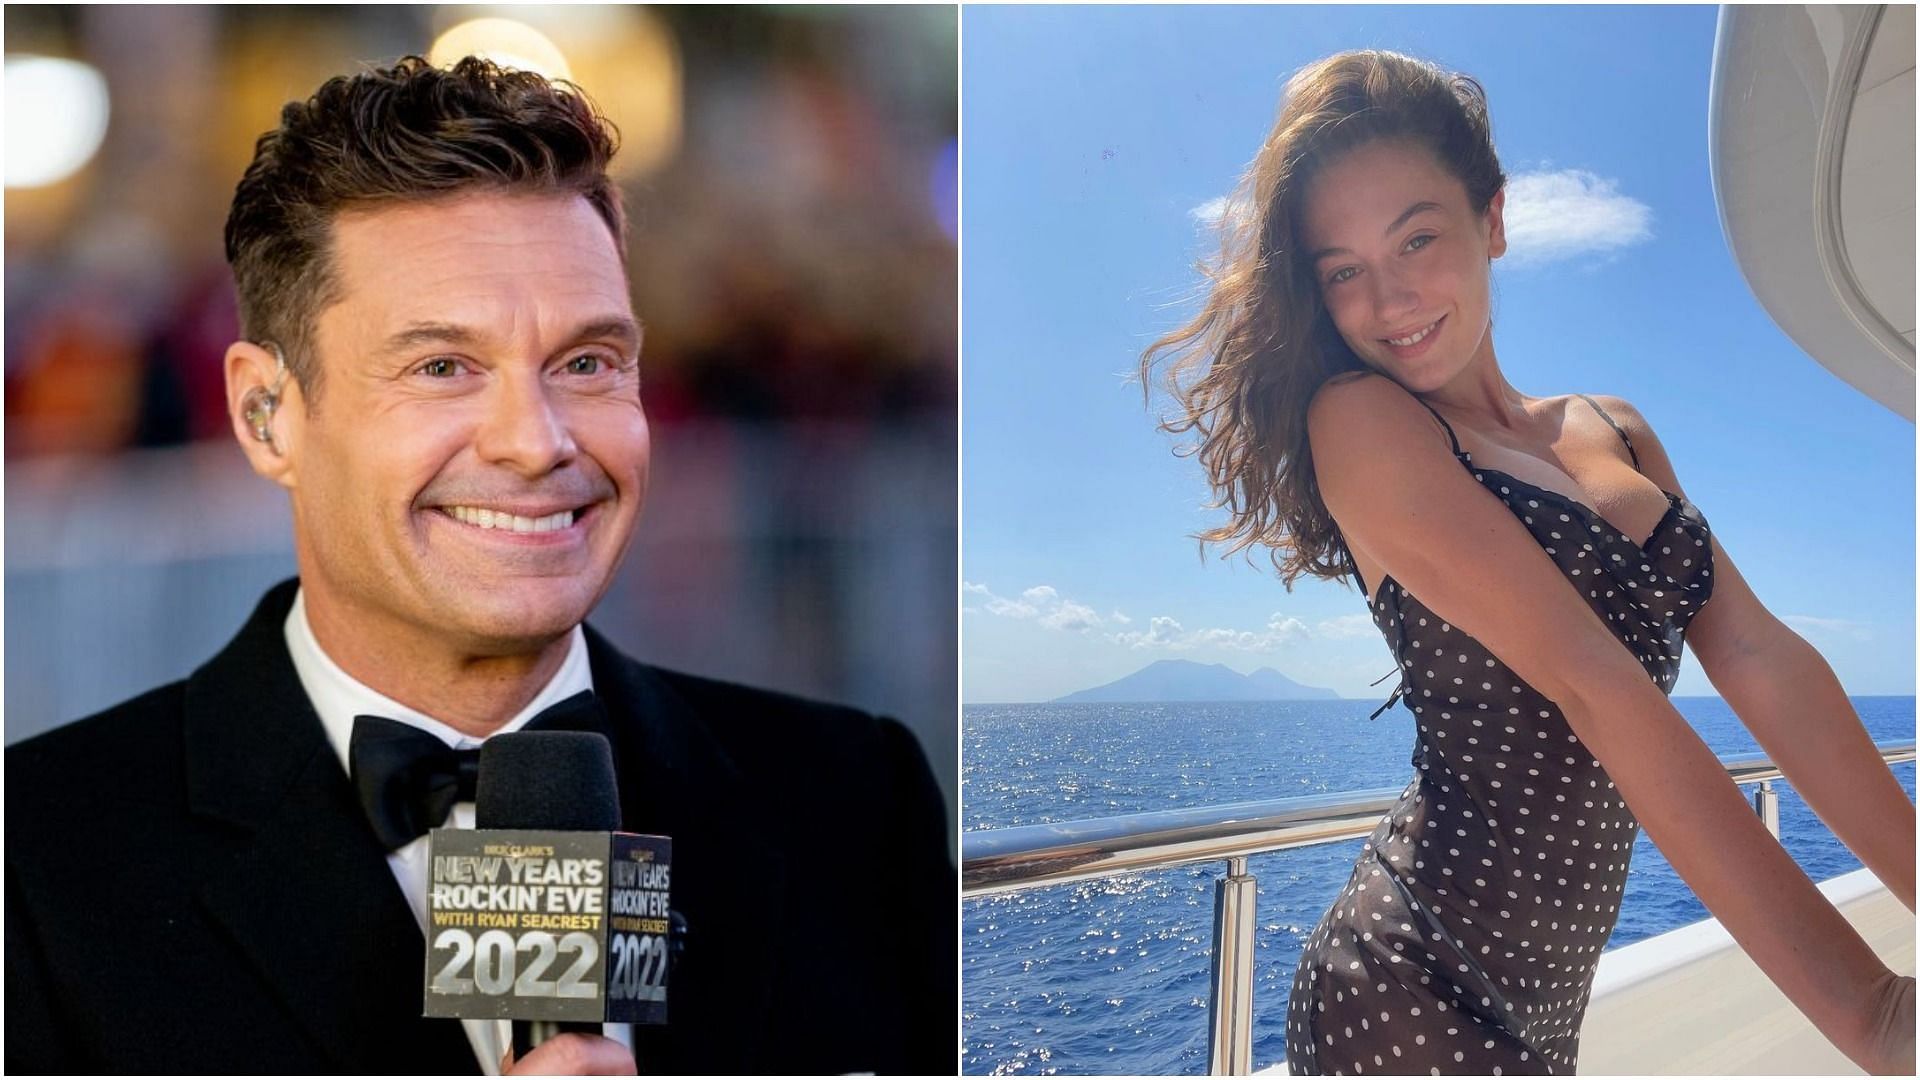 Ryan Seacrest and Aubrey Paige were recently spotted together (Images via Roy Rochlin/Getty Images and aubreypaige_/Instagram)